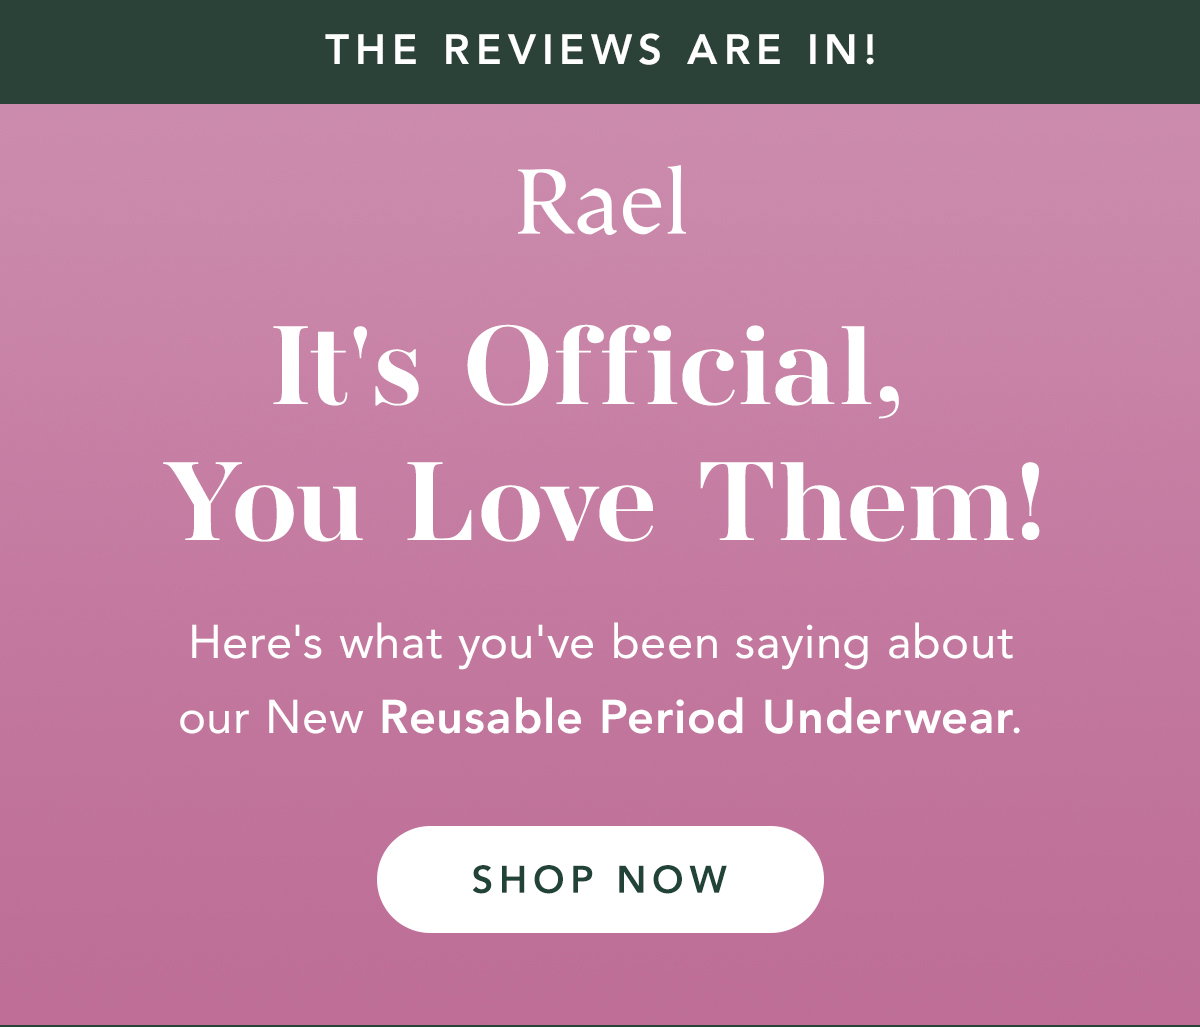 Rael: The Reviews are In! 🤩